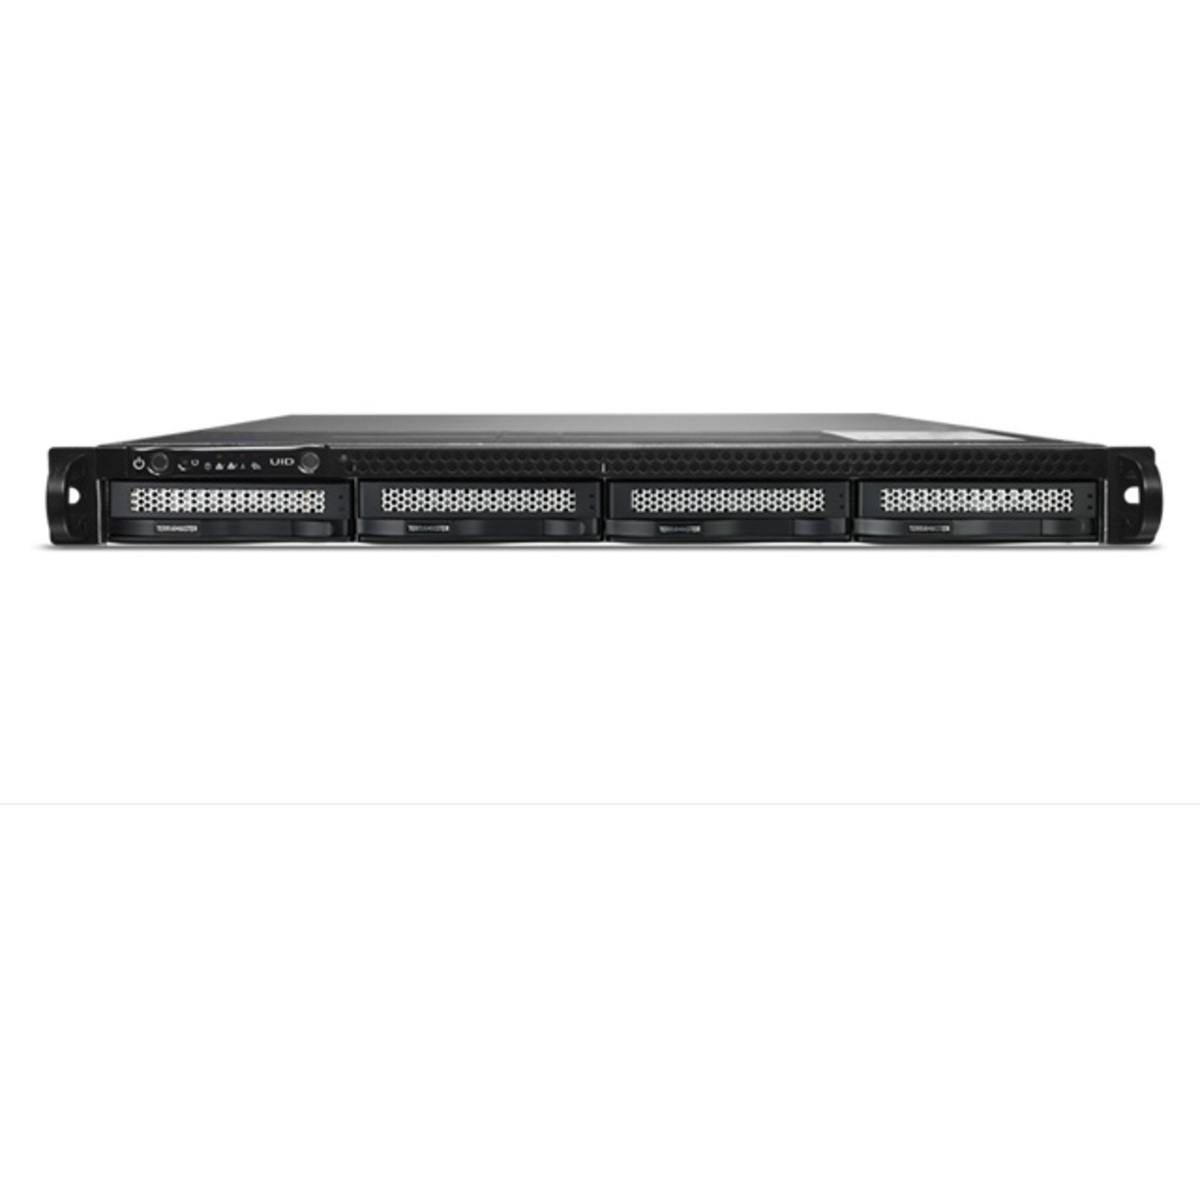 TerraMaster U4-111 66tb 4-Bay RackMount Multimedia / Power User / Business NAS - Network Attached Storage Device 3x22tb Western Digital Red Pro WD221KFGX 3.5 7200rpm SATA 6Gb/s HDD NAS Class Drives Installed - Burn-In Tested U4-111